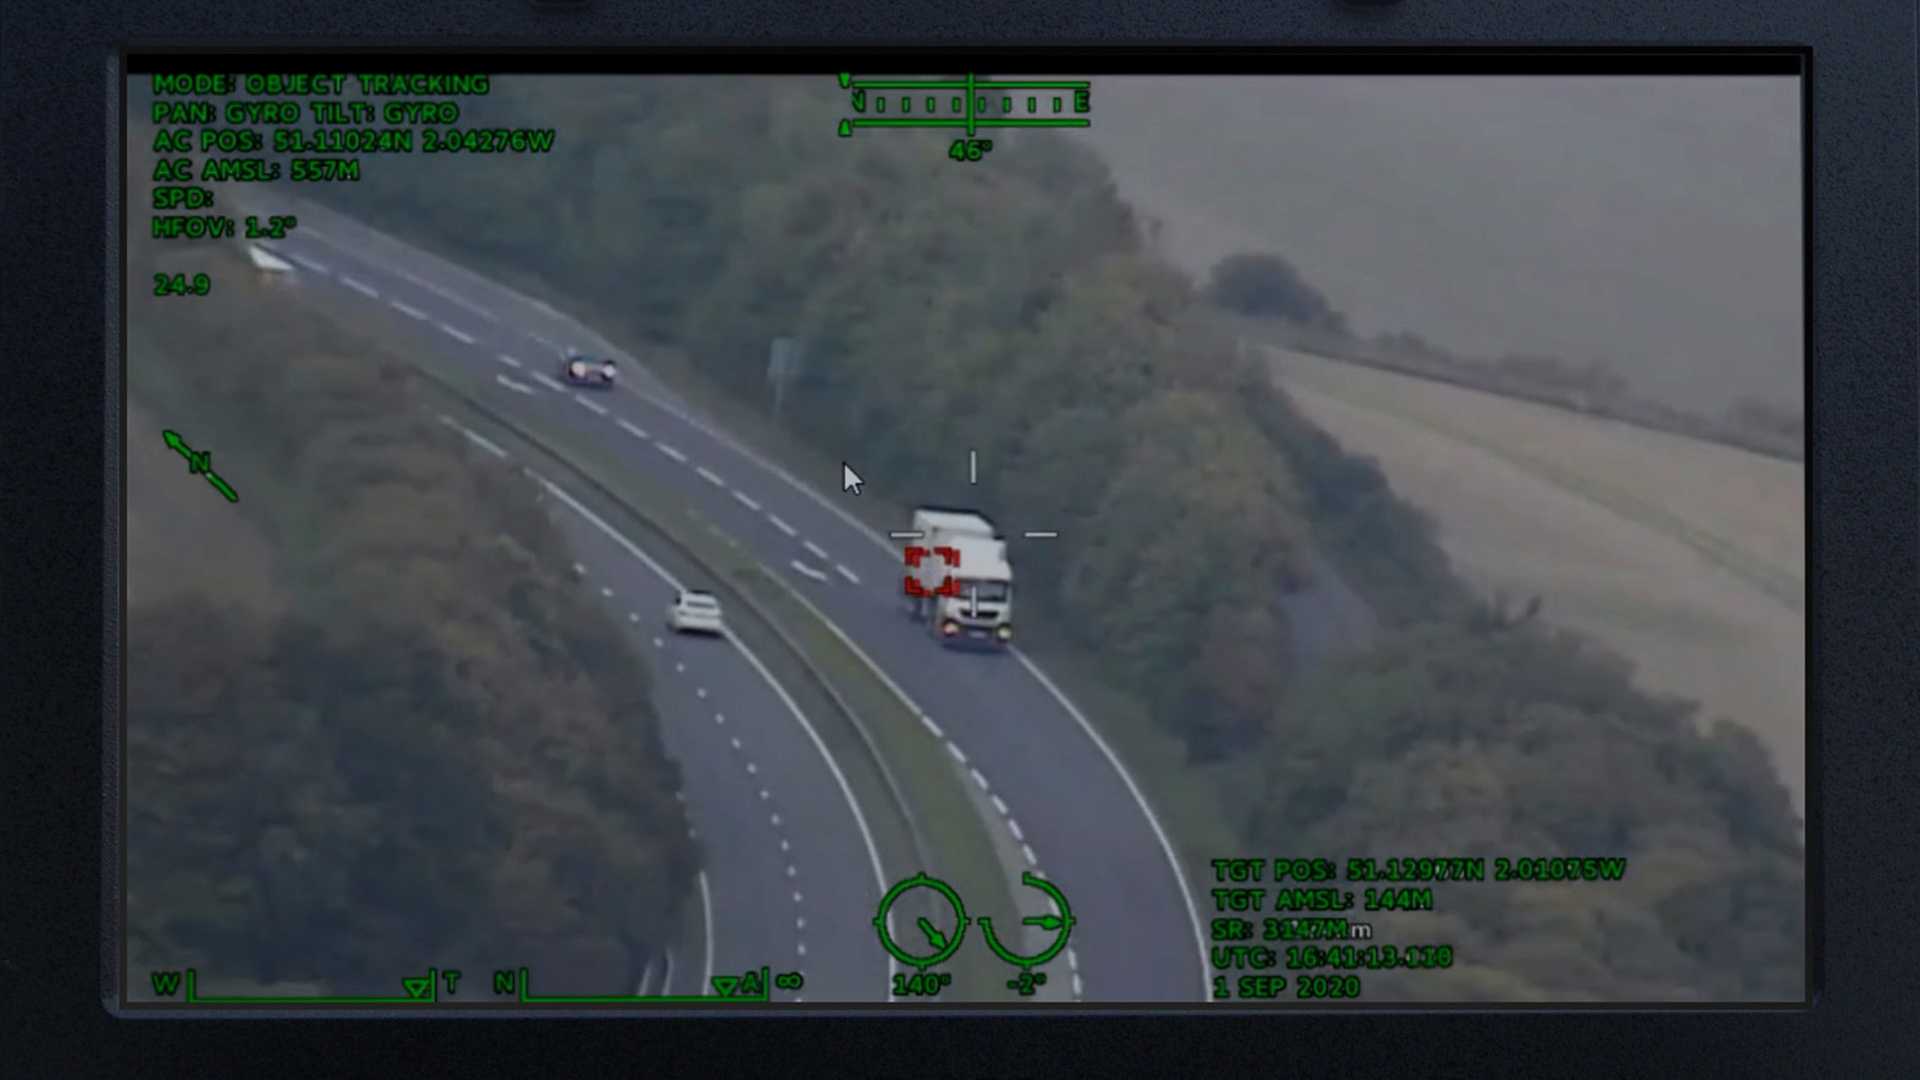 Motorway traffic viewed from a drone camera